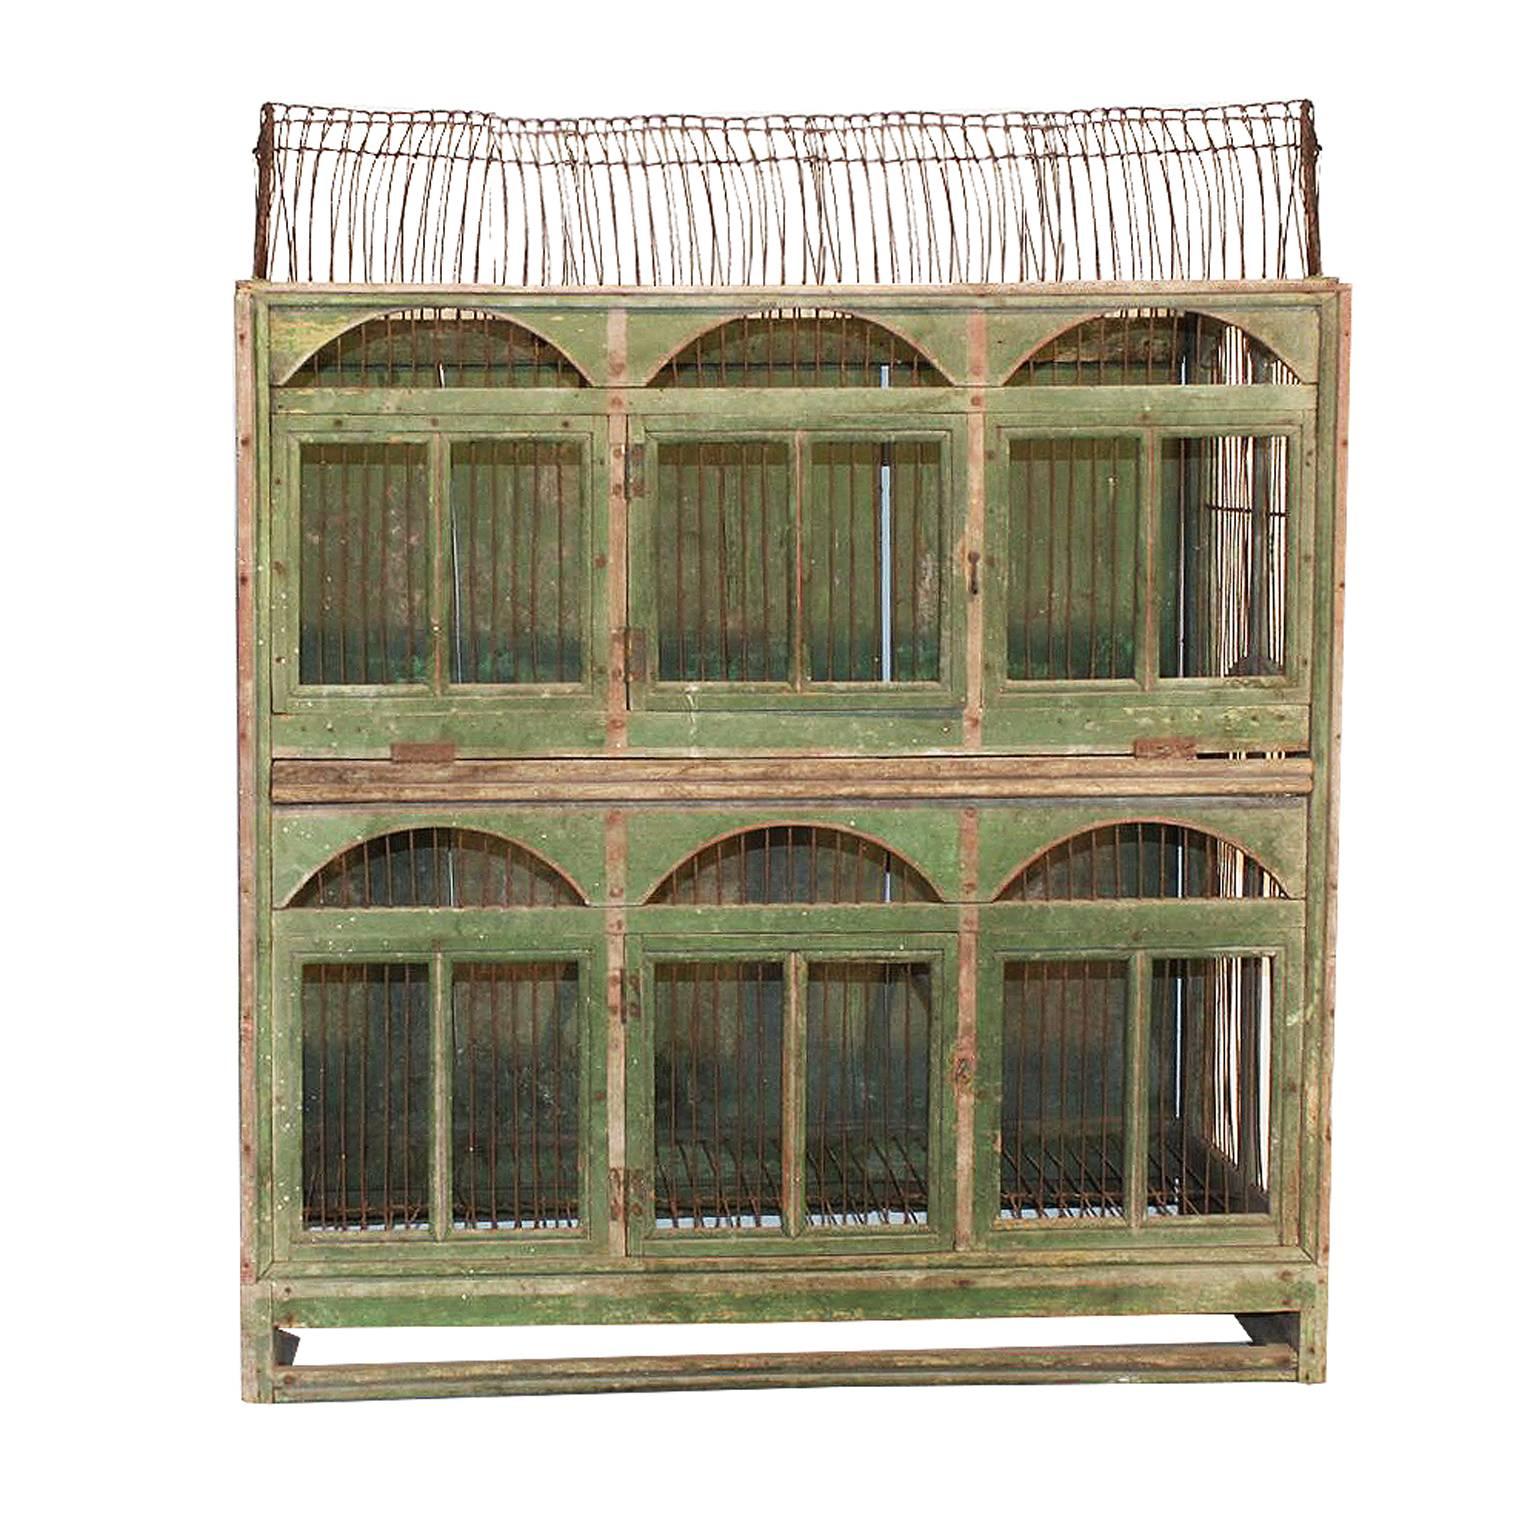 Italian 1840s Large Size Green Painted Wooden Birdcage with Arched Windows